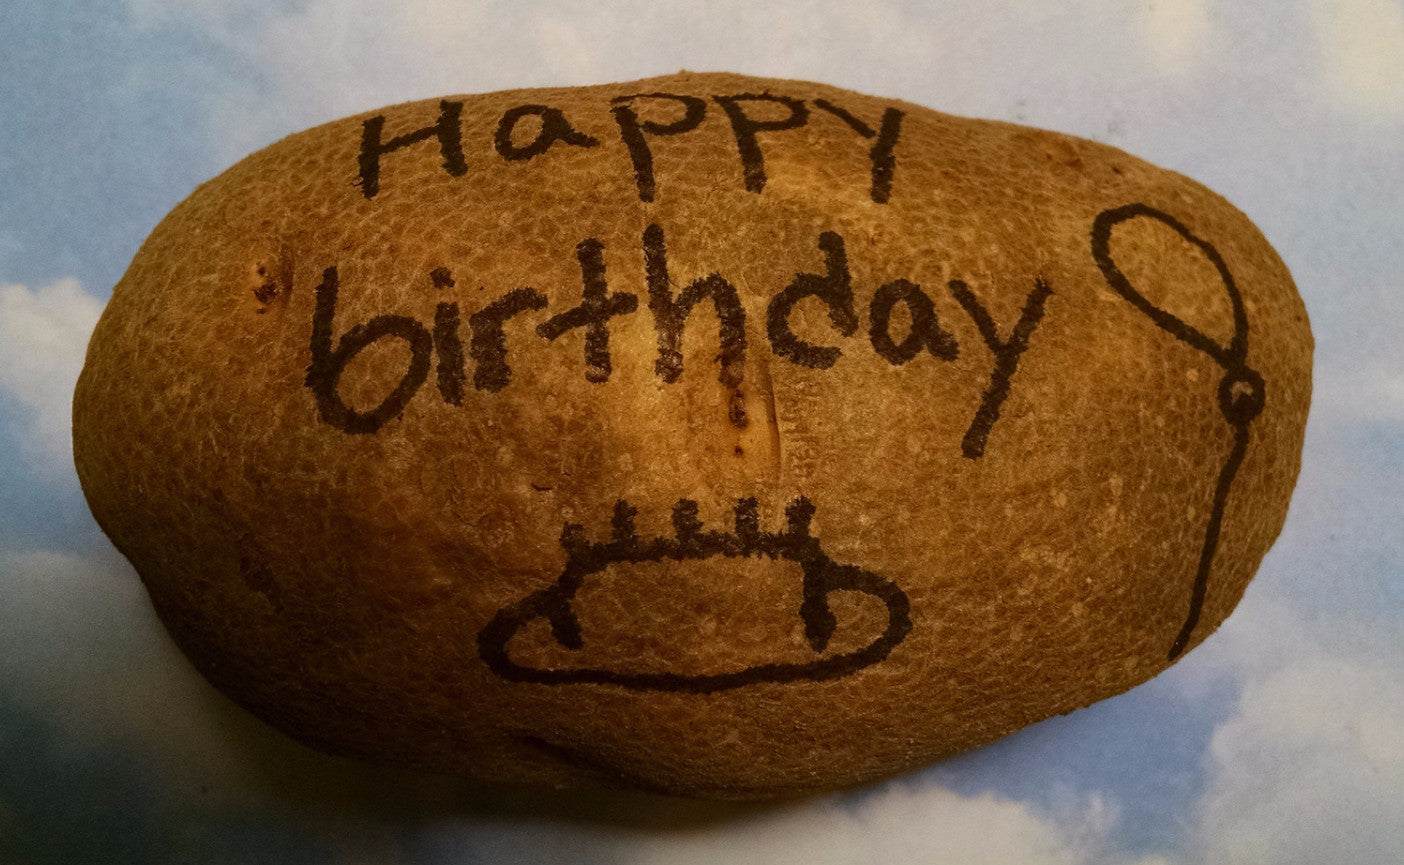 Happy Birthday, Ballon with a cake yum. Send a parcel potato with a happy birthday note! 